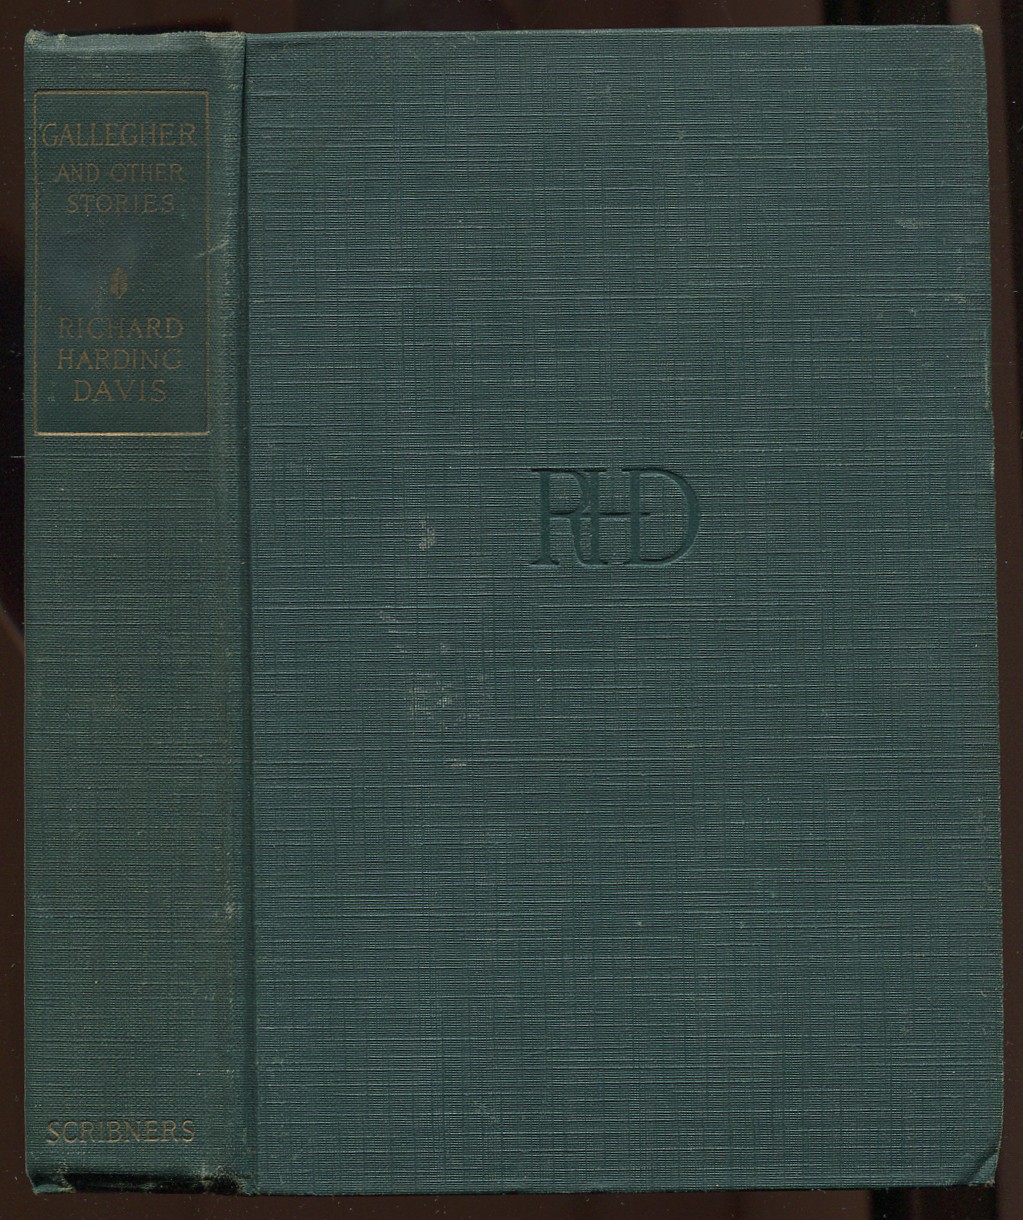 Gallegher and Other Stories: The Novels and Stories of Richard Harding Davis - DAVIS, Richard Harding